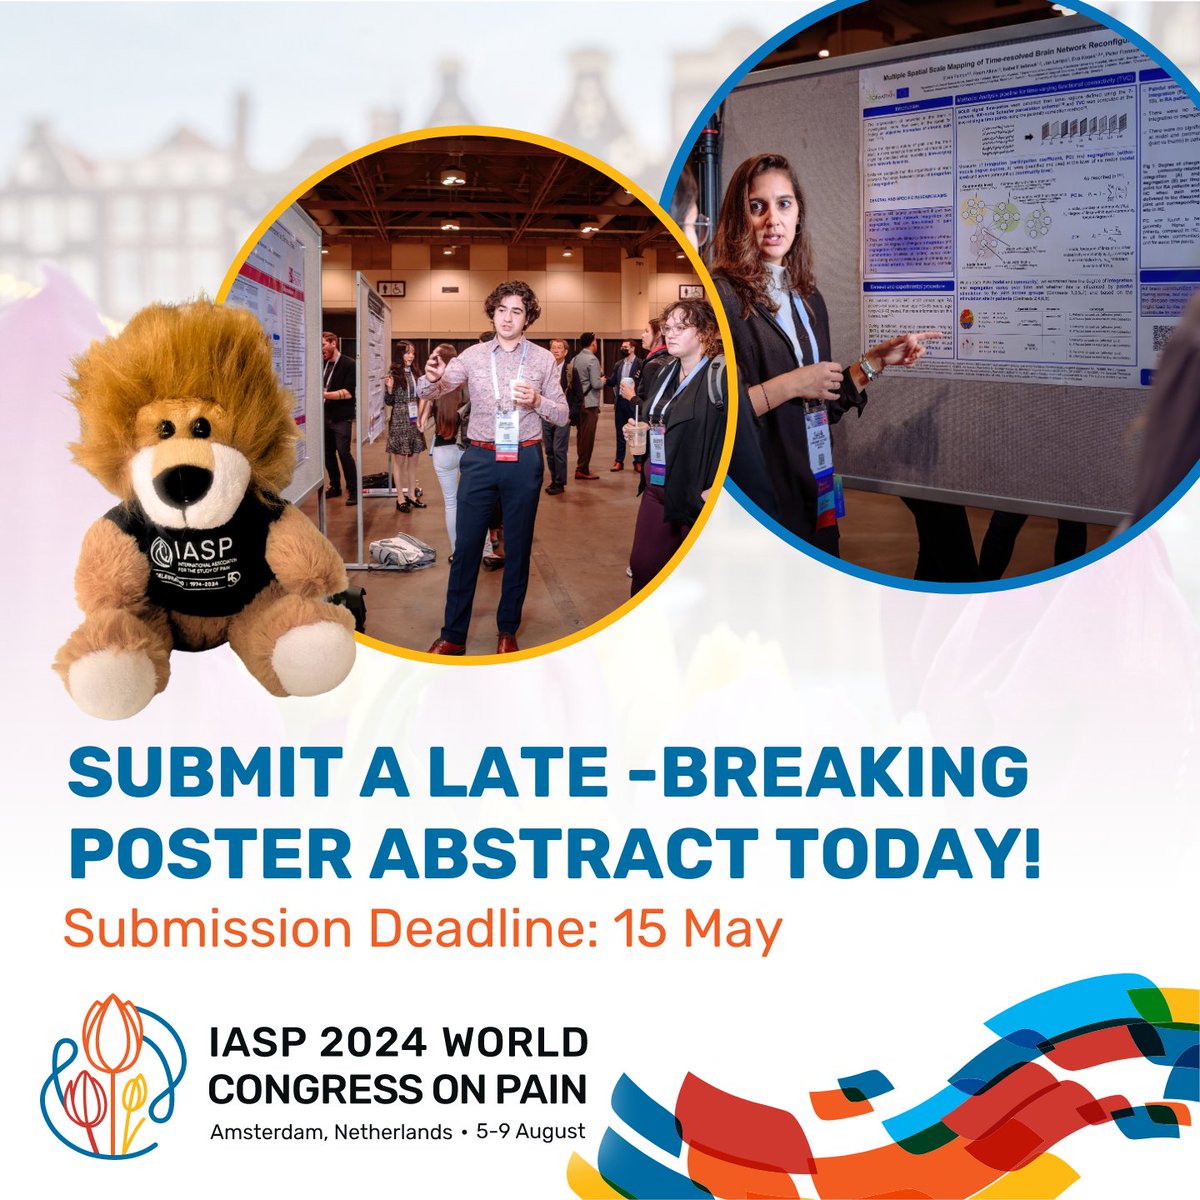 Submit your late-breaking poster abstract for #WC2024 by May 15th. Don't miss this opportunity to contribute to the advancement of pain research and engage with leading scholars in the field. Learn more: bit.ly/3T7Txp4